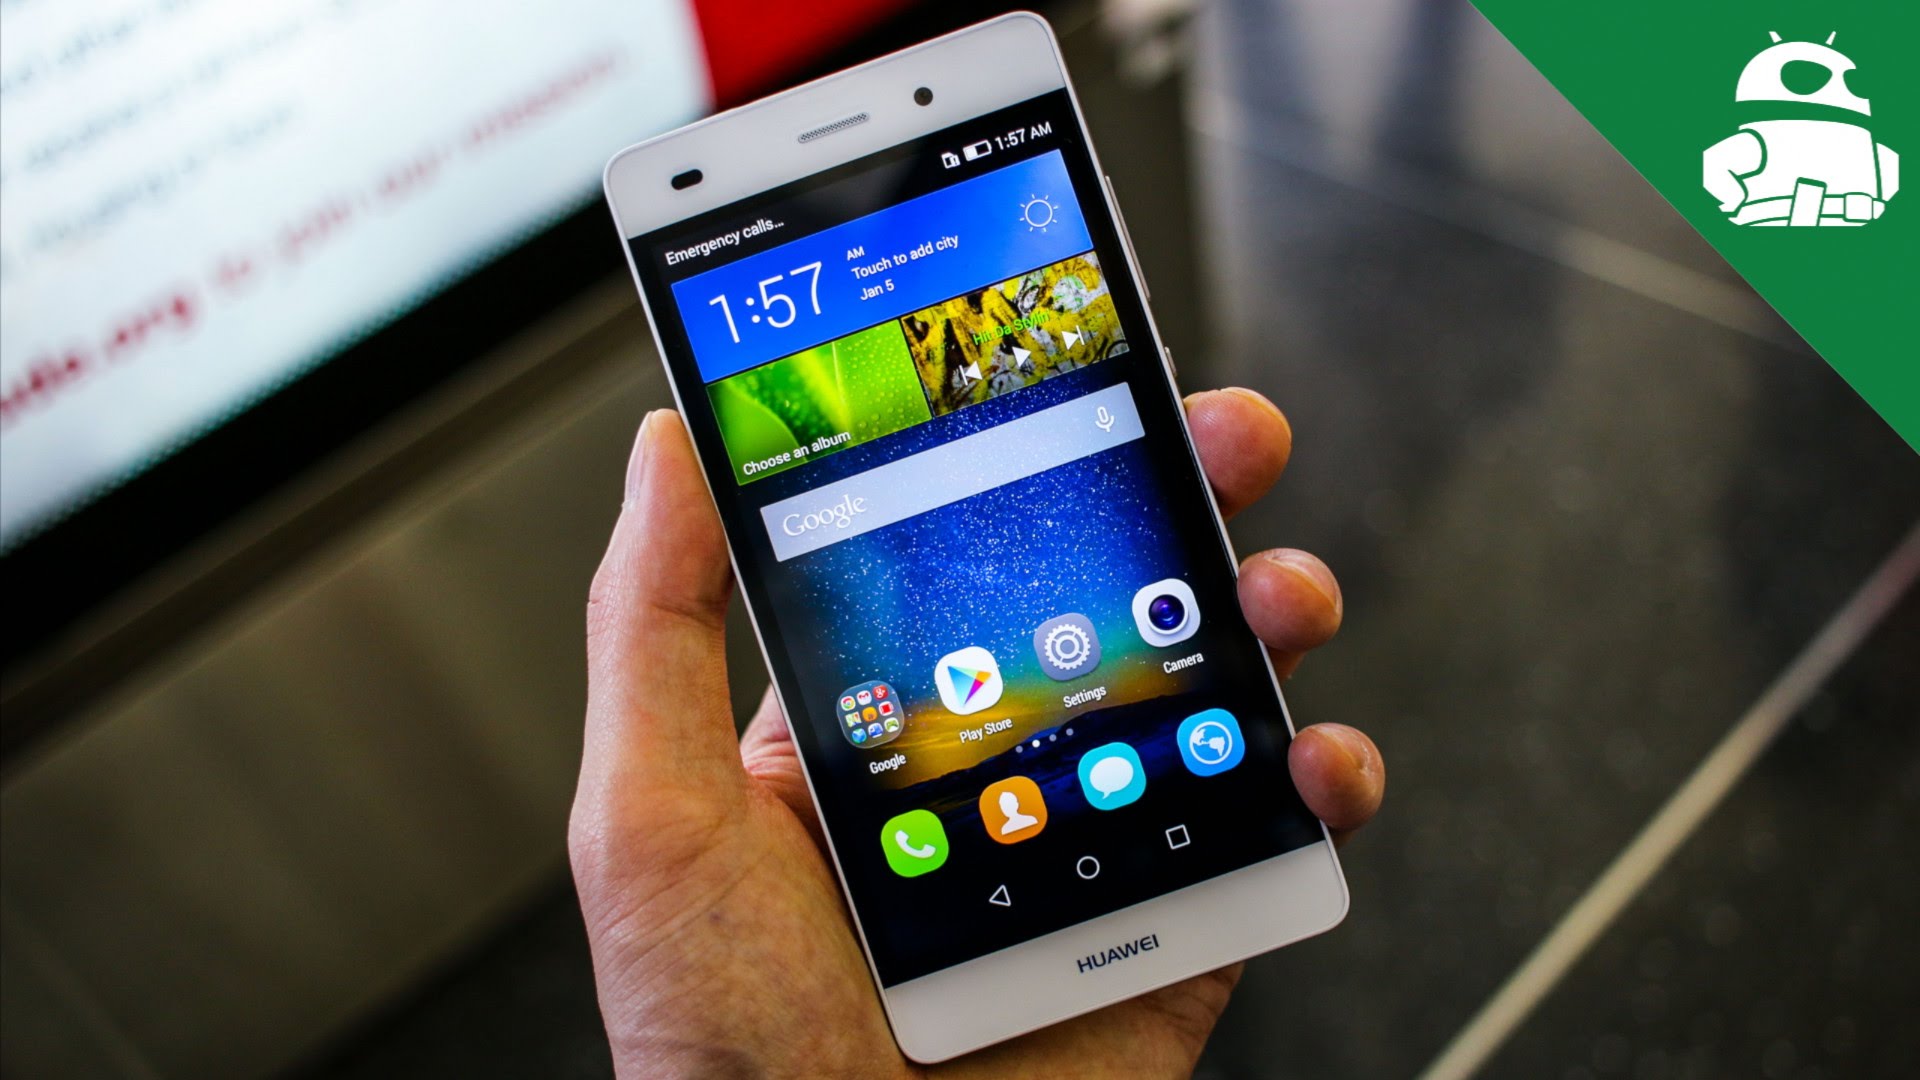 HUAWEI P8 Lite on First Impressions